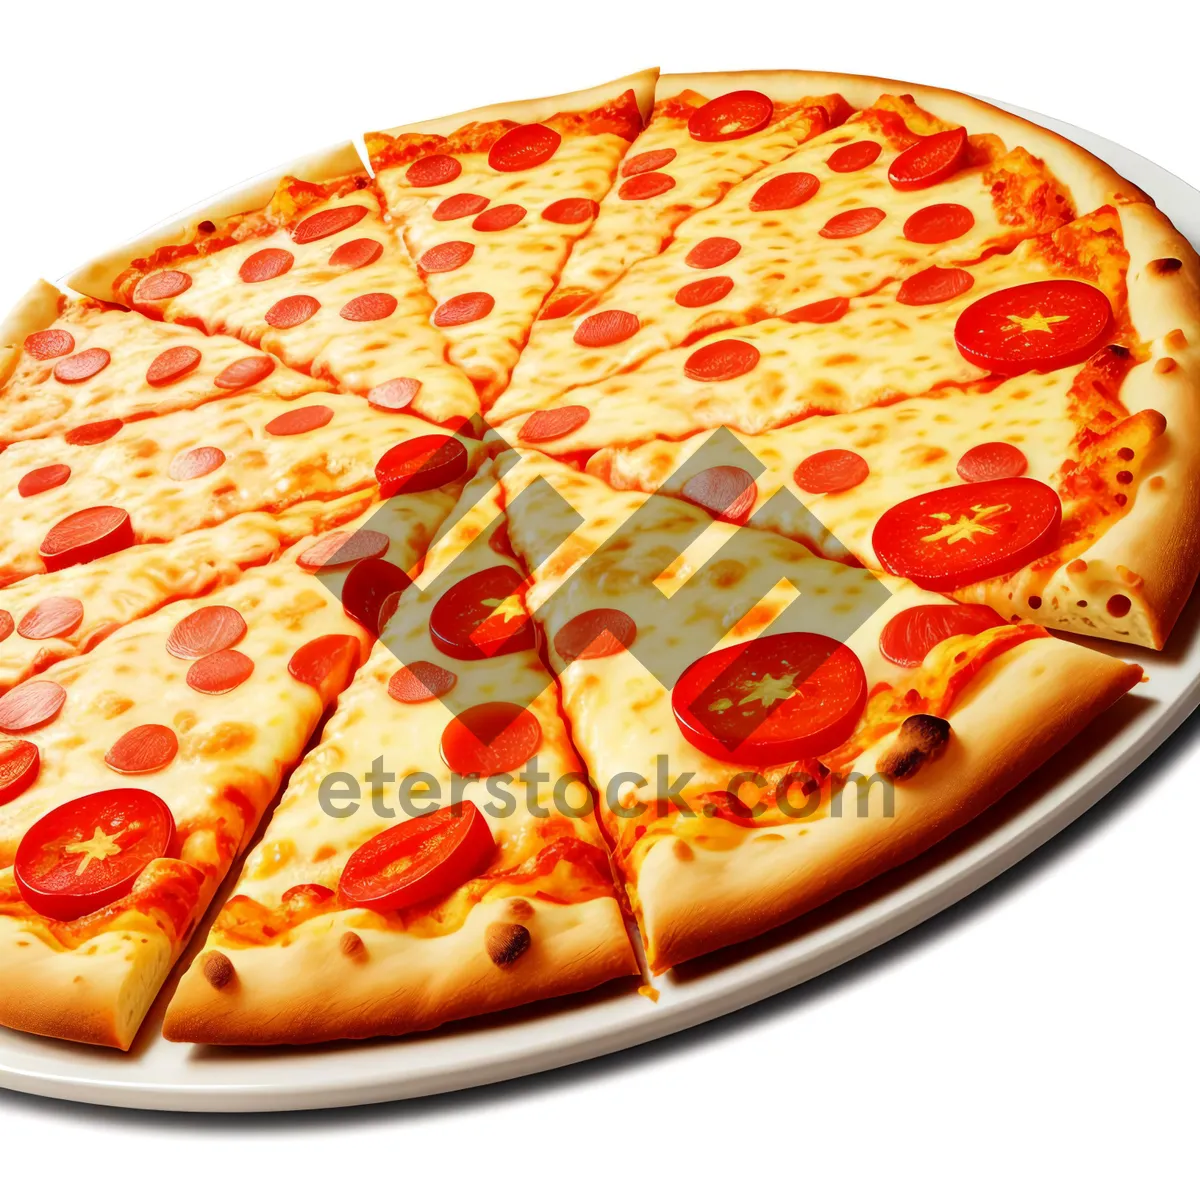 Picture of Gourmet Pizza Slice with Delicious Toppings